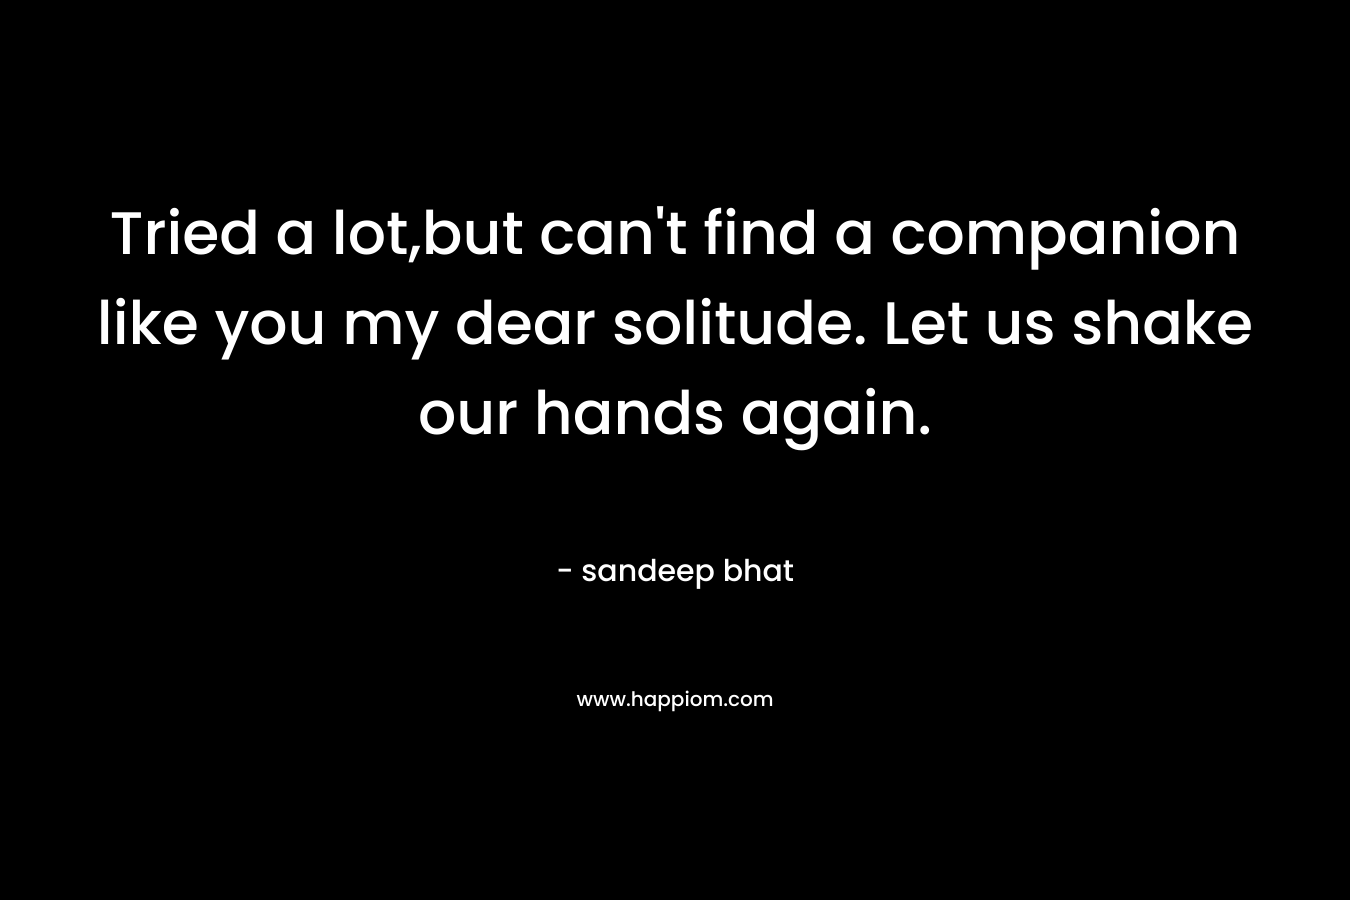 Tried a lot,but can't find a companion like you my dear solitude. Let us shake our hands again.